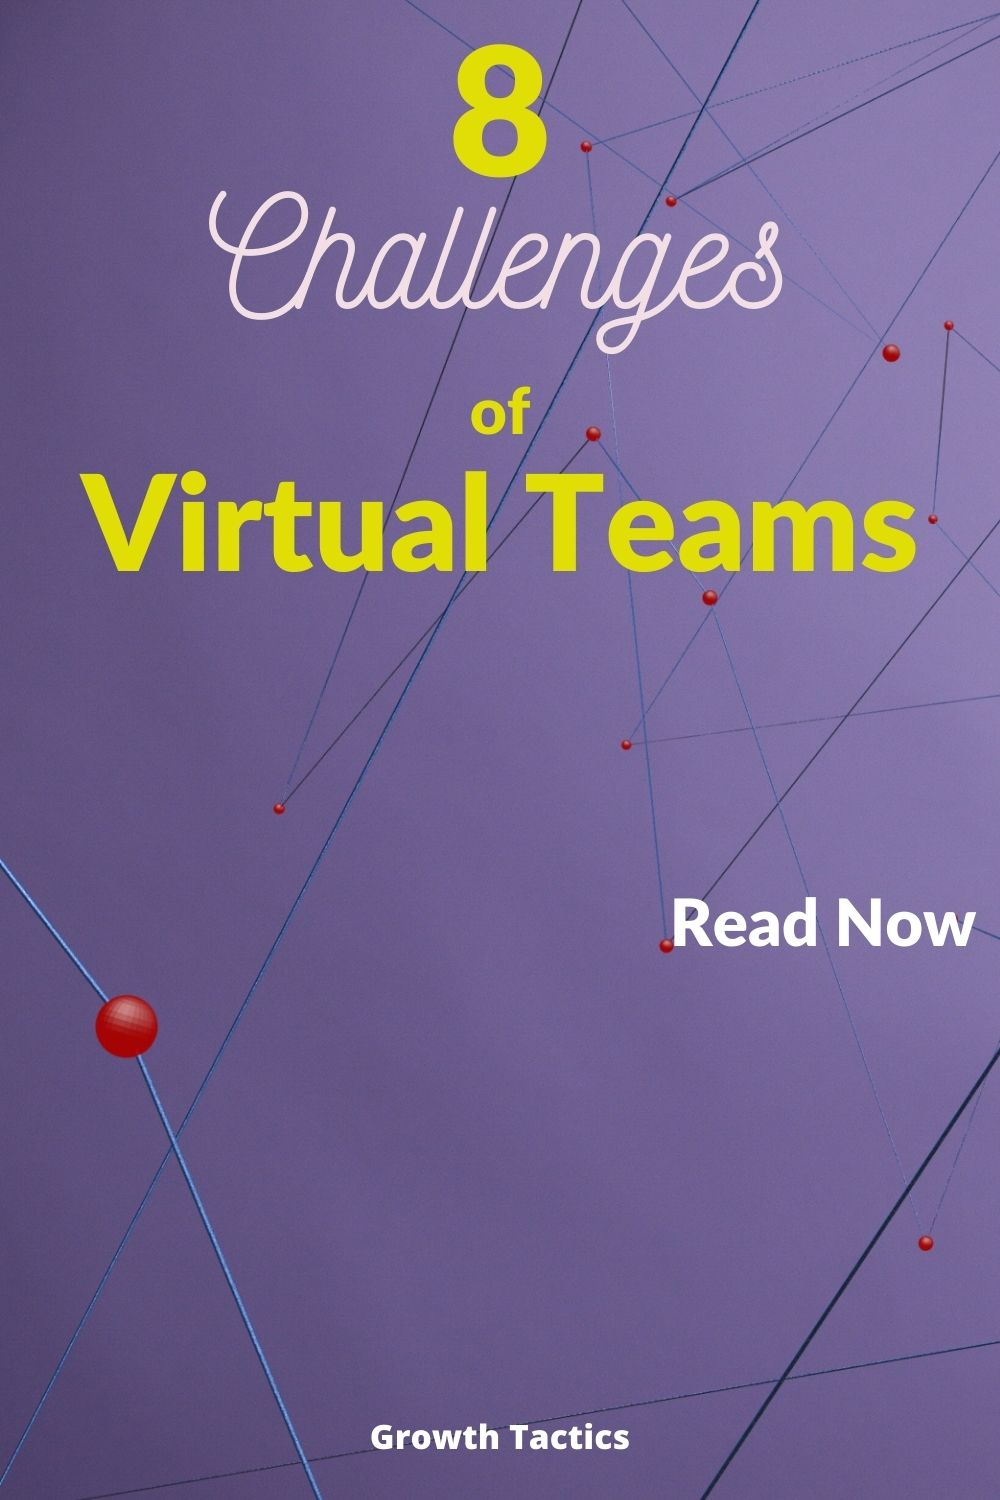 8 Challenges of Virtual Teams and How to Overcome Them 
